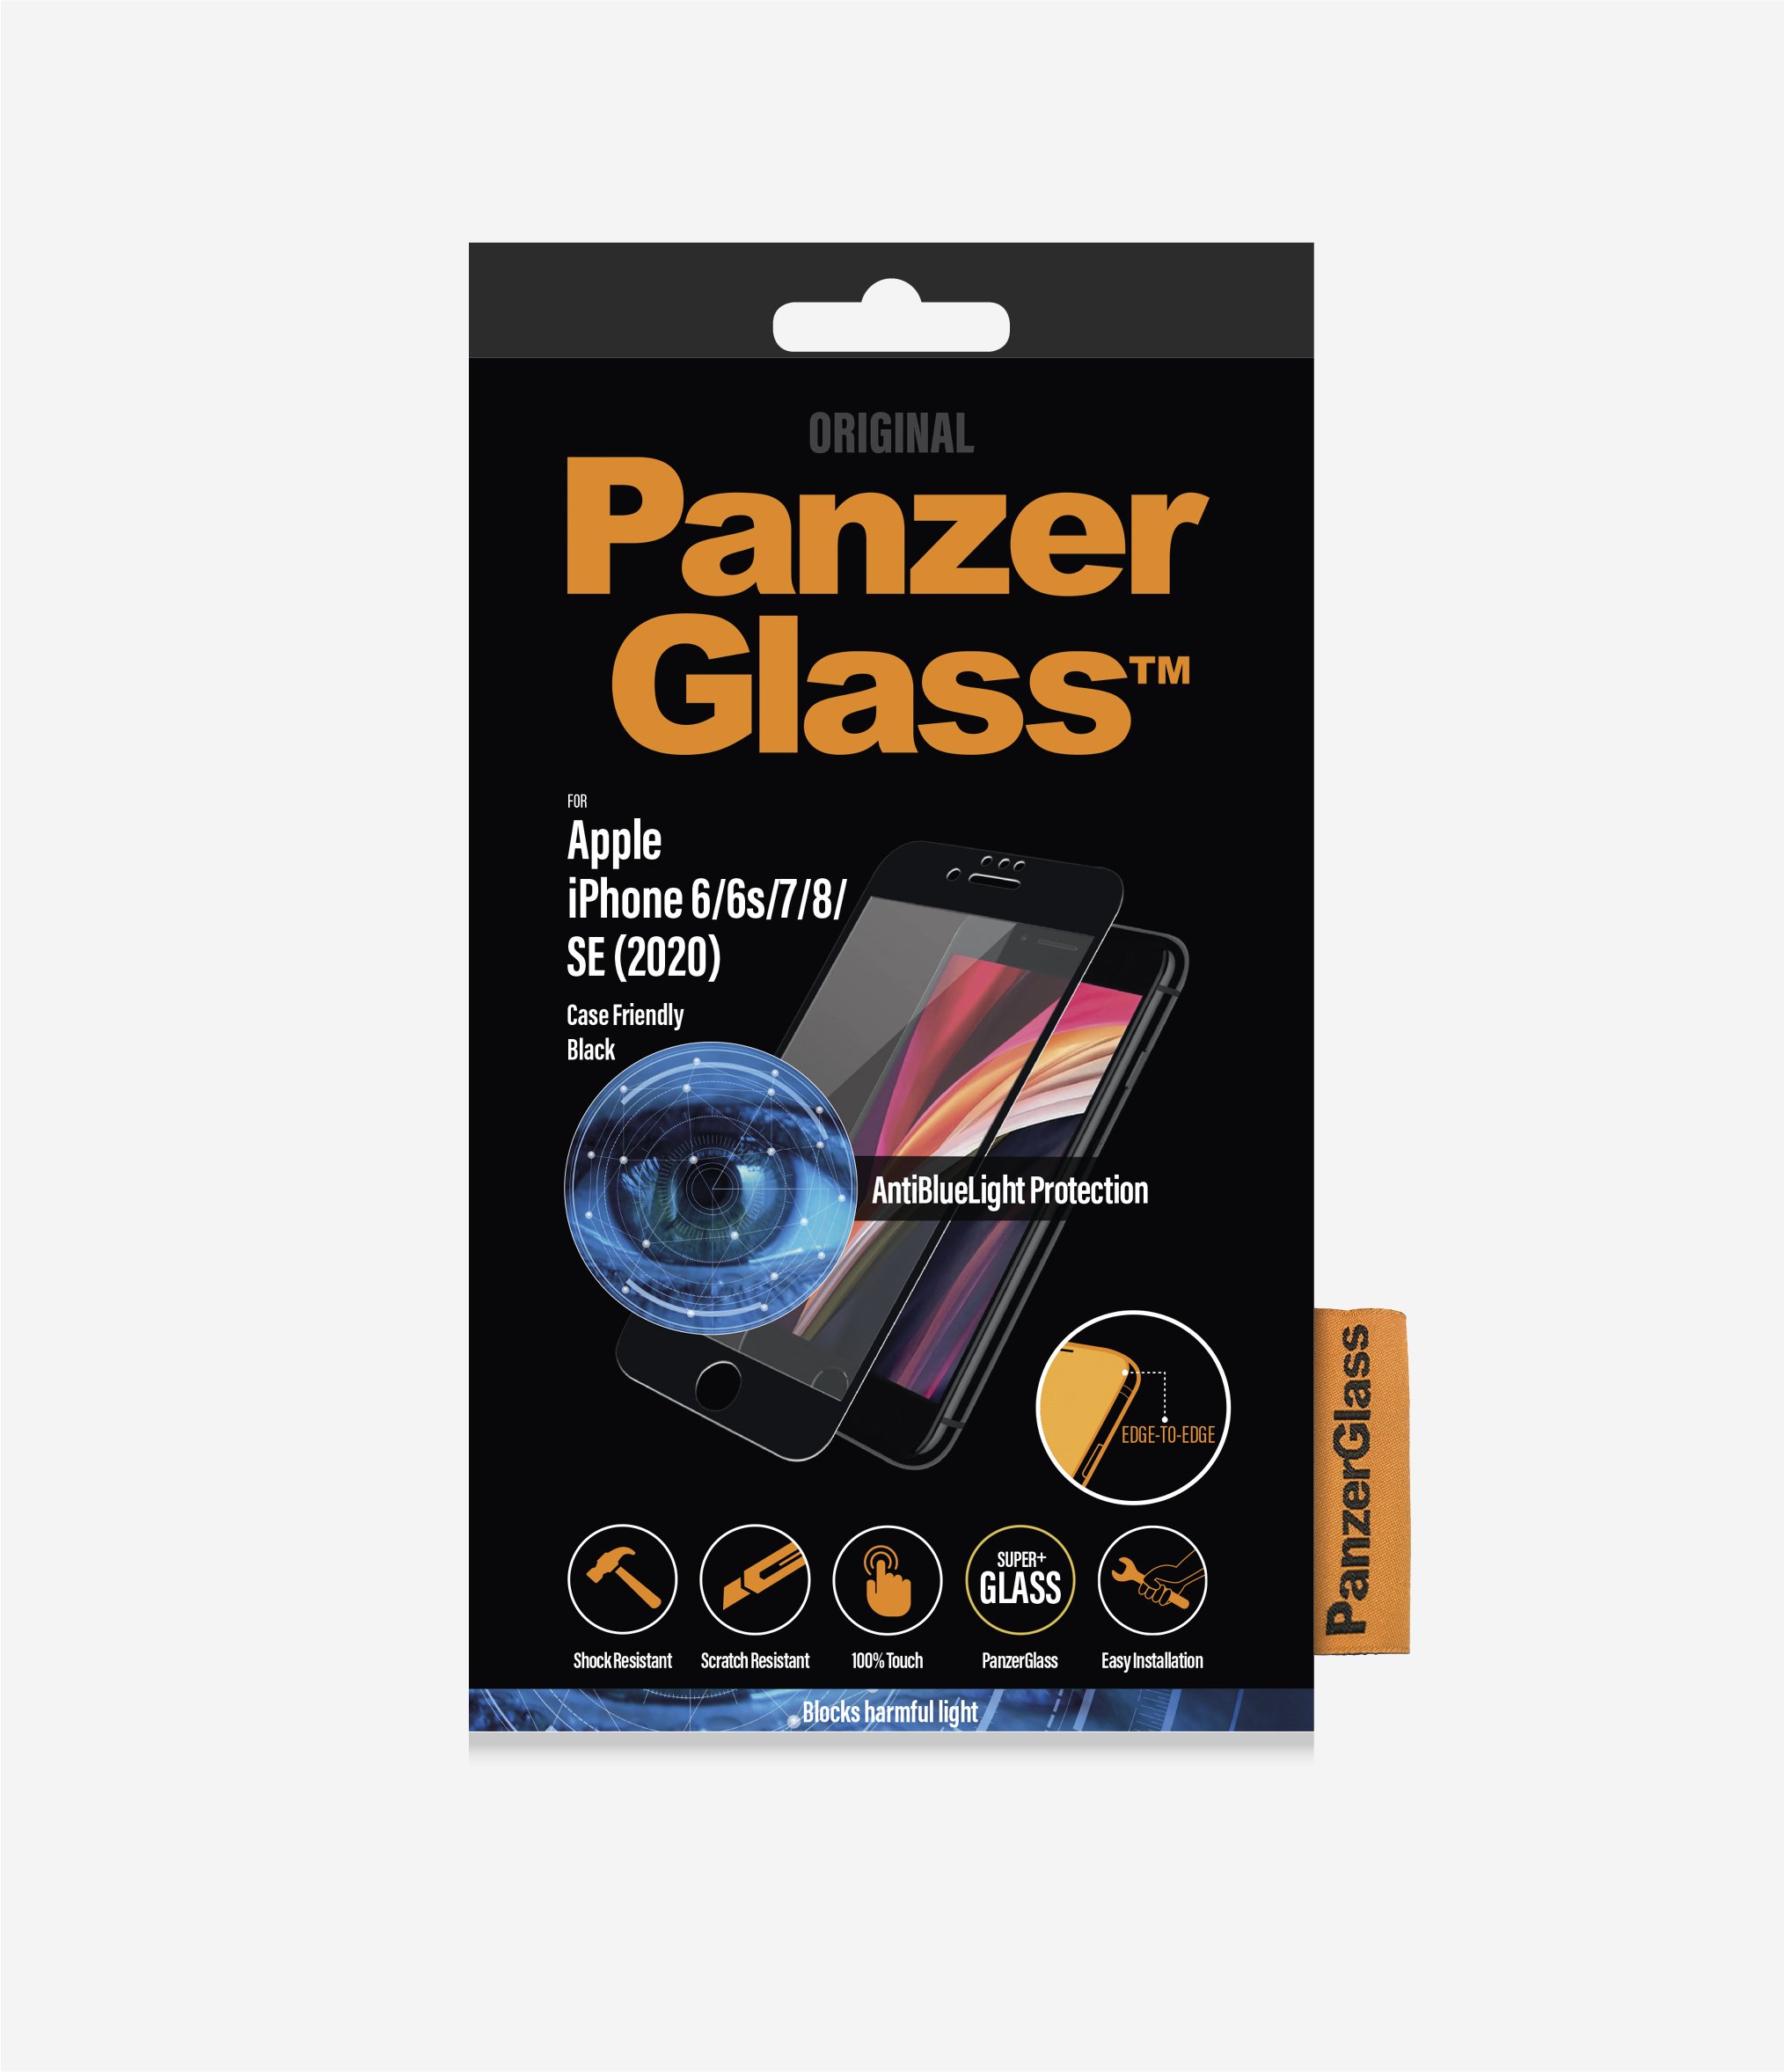 PanzerGlass™ Apple iPhone 6/6s/7/8/SE (2020) - Anti-blue light - Black (2689) -Screen Protector - Resistant to scratches, Shock-absorbing, 100% touch